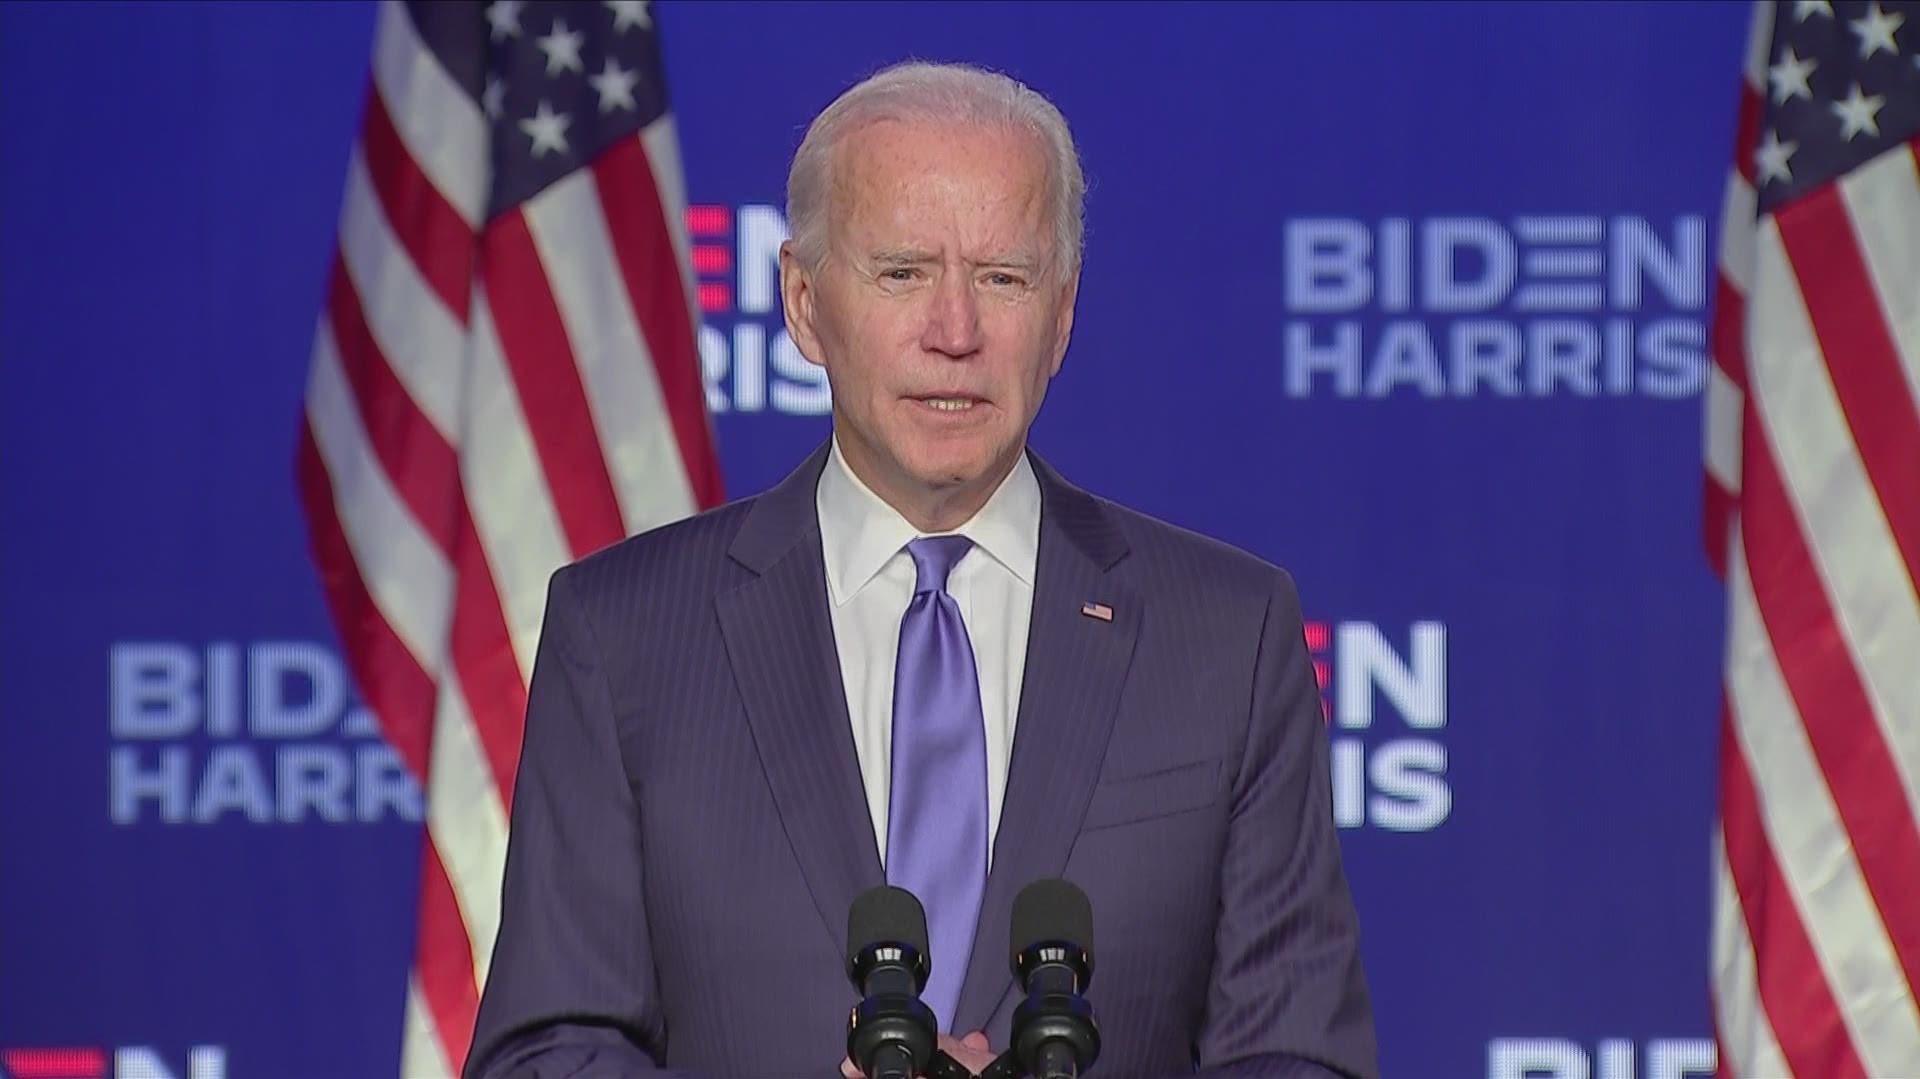 Biden Leads Trump In Pennsylvania And Georgia With Path To